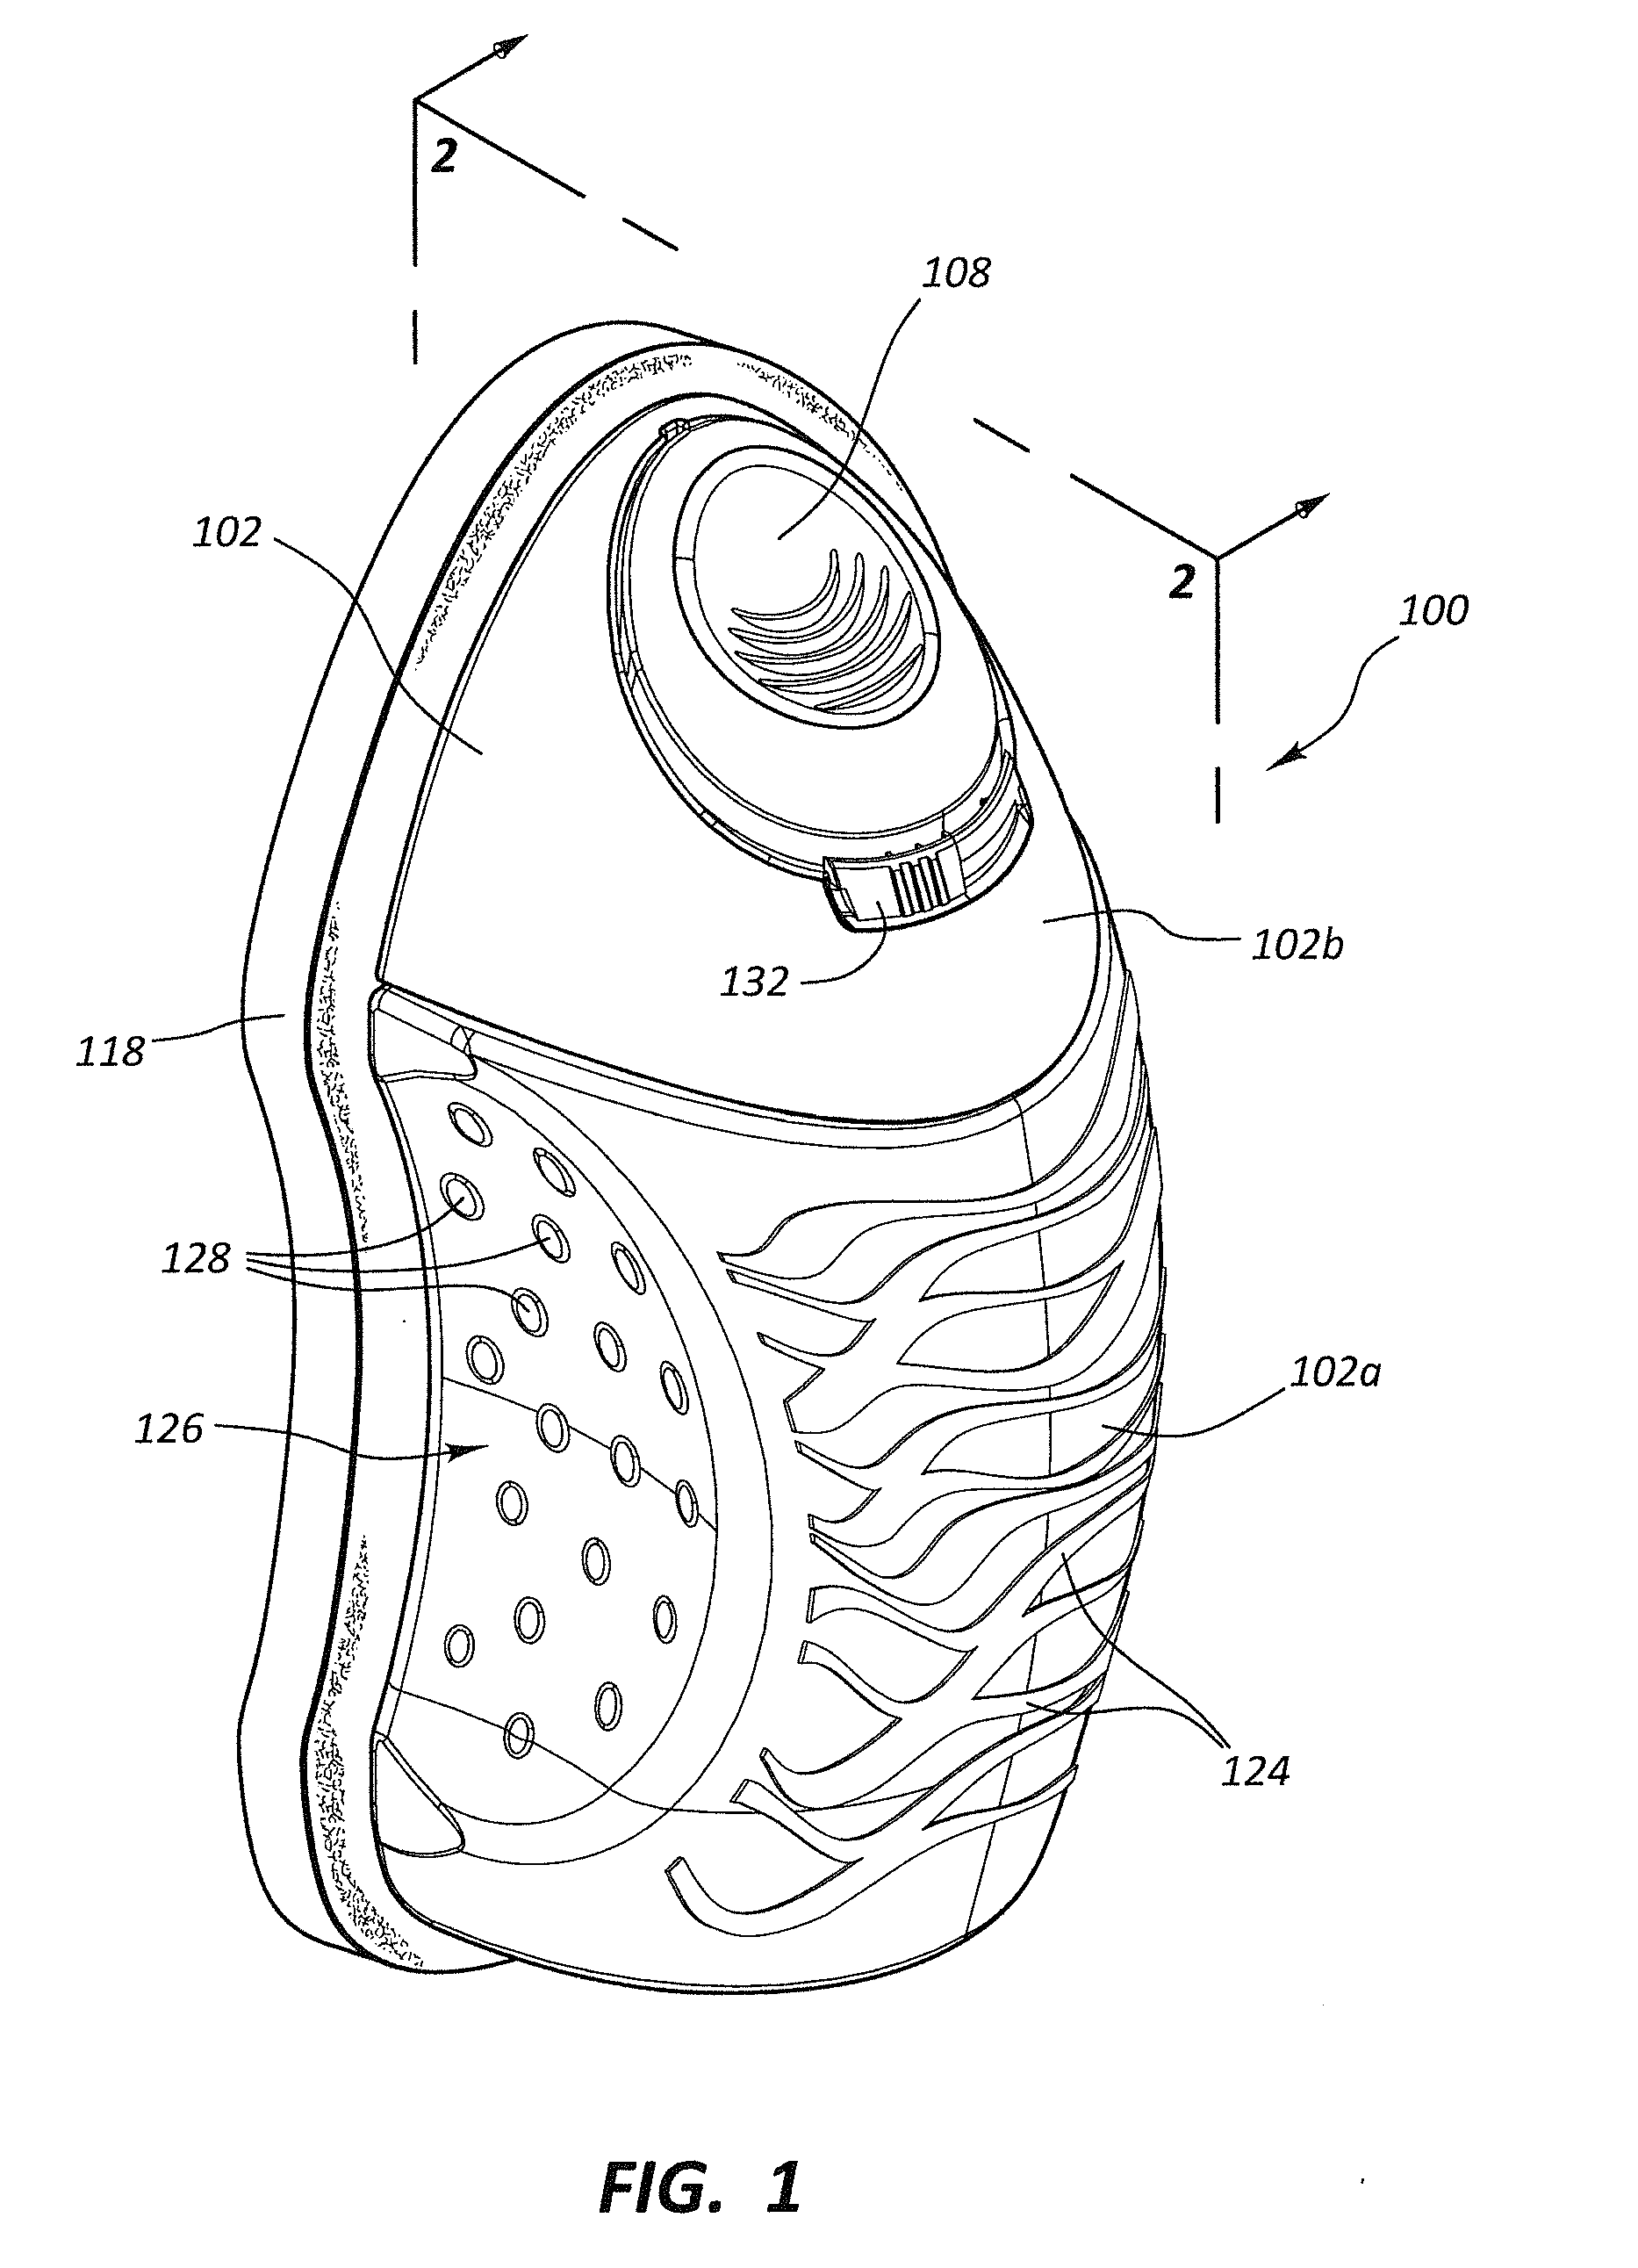 Article for scrubbing and cleaning hard surfaces and a method for use thereof